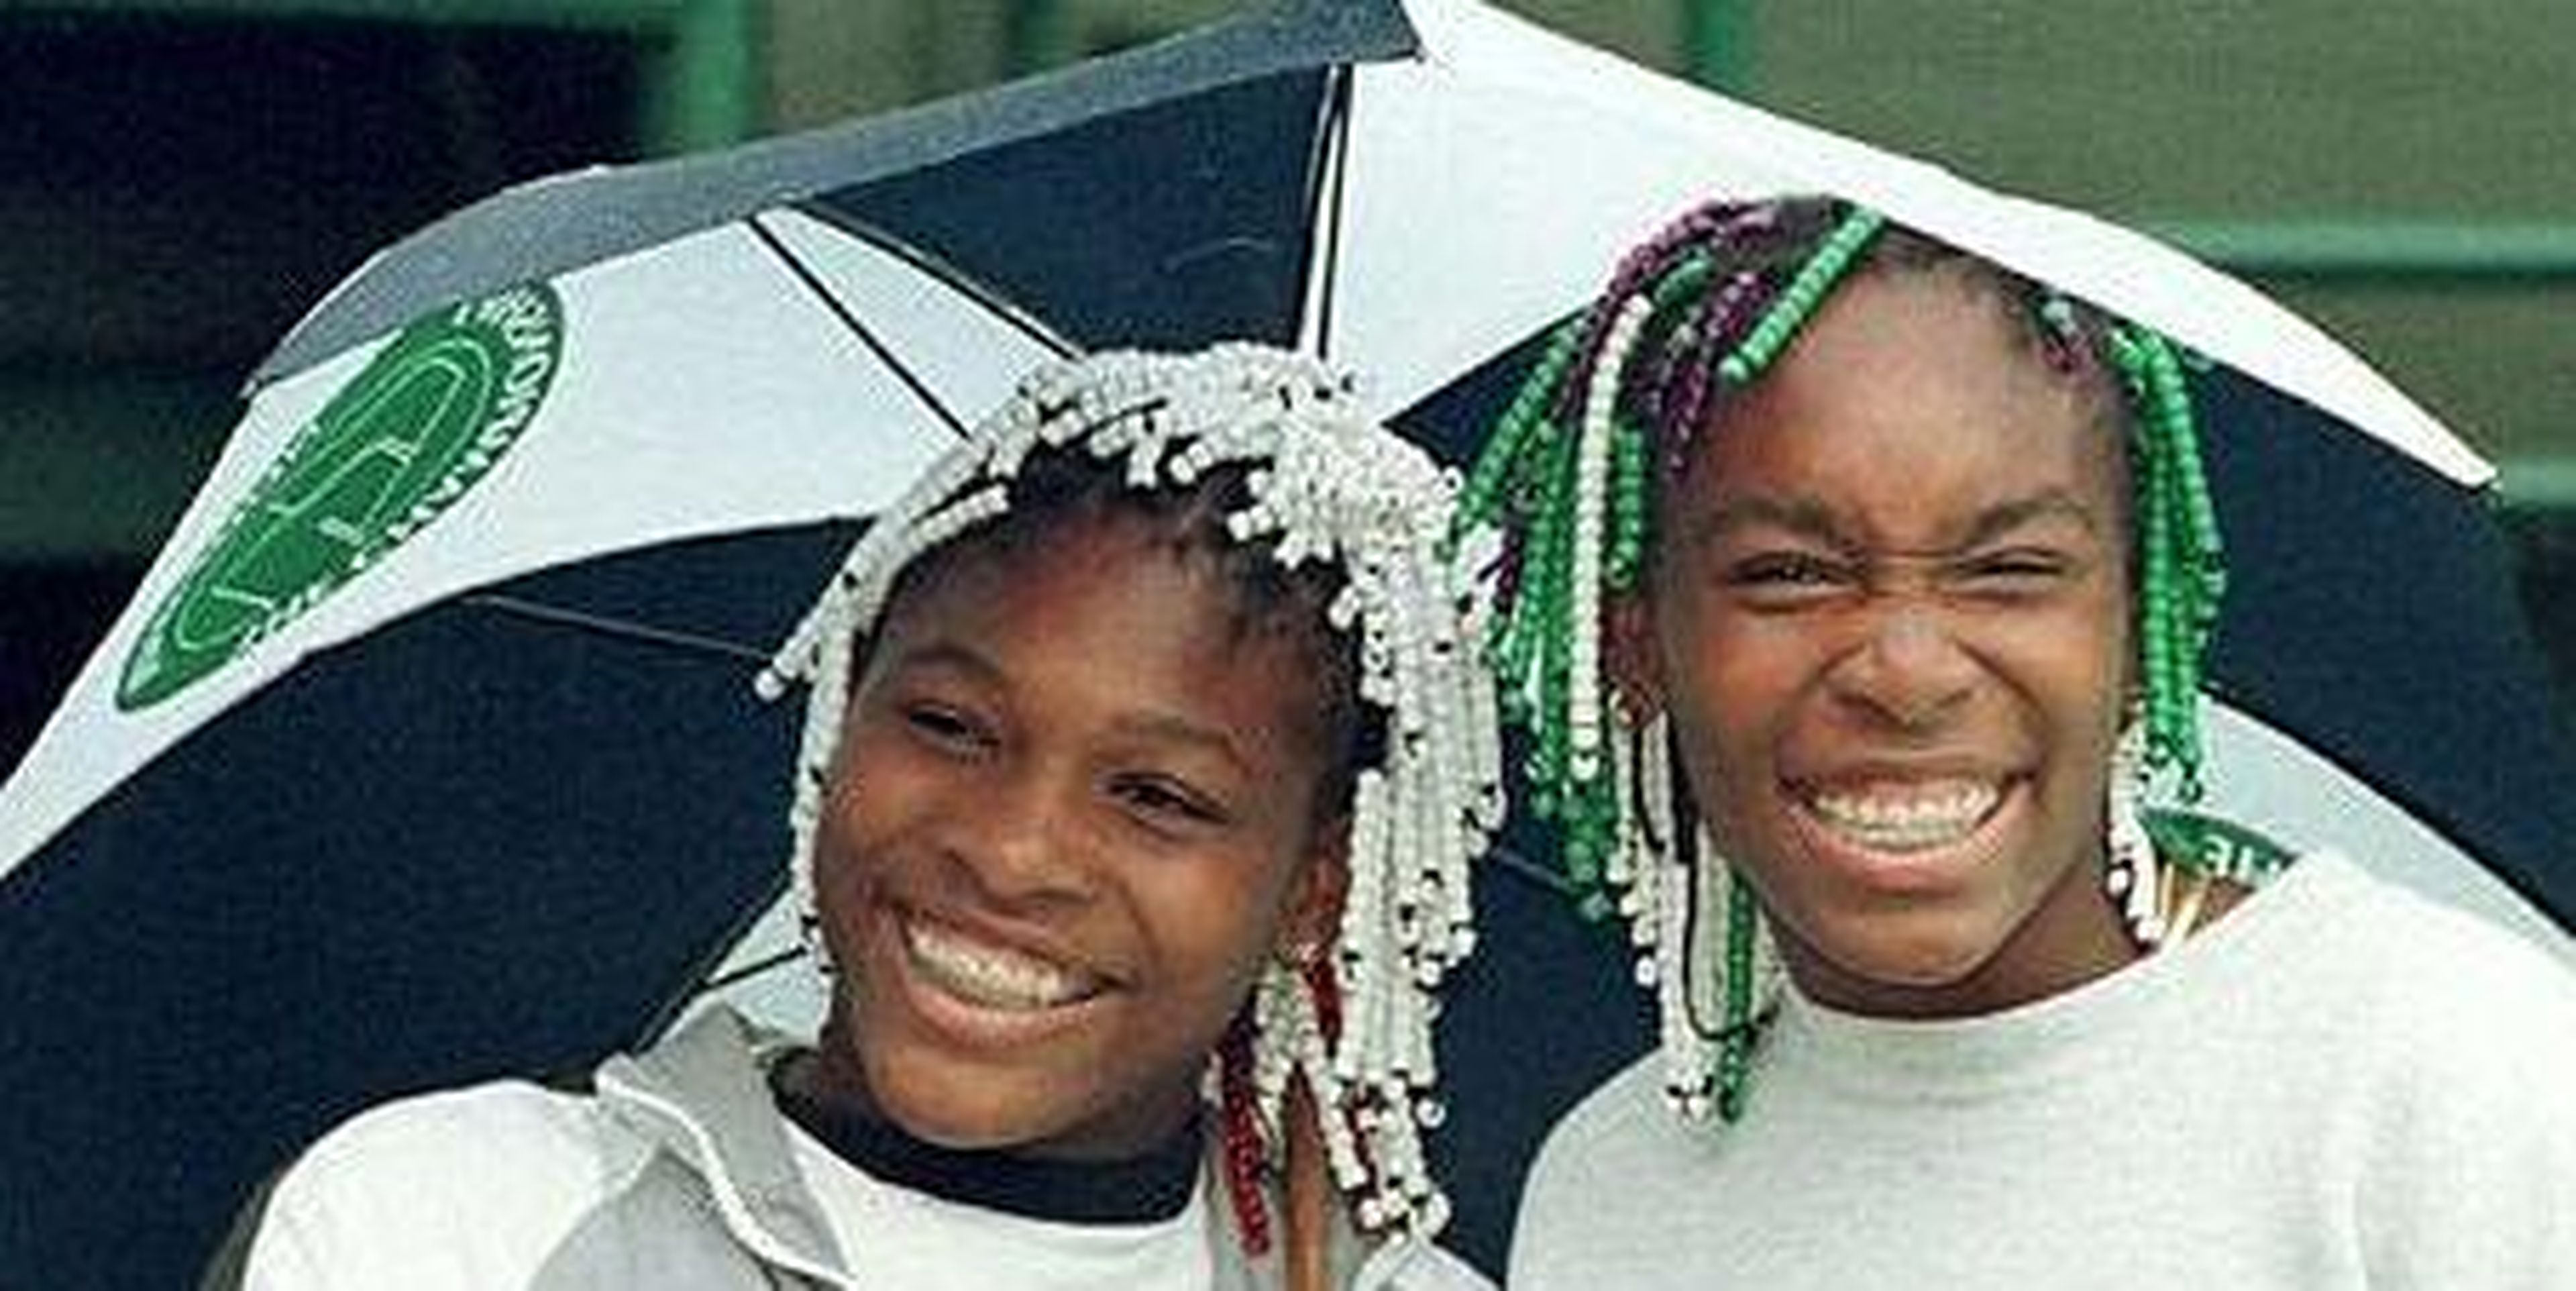 Before they were grand slam champions, Serena and Venus Williams spent their childhood being both trained and educated by their father Richard.